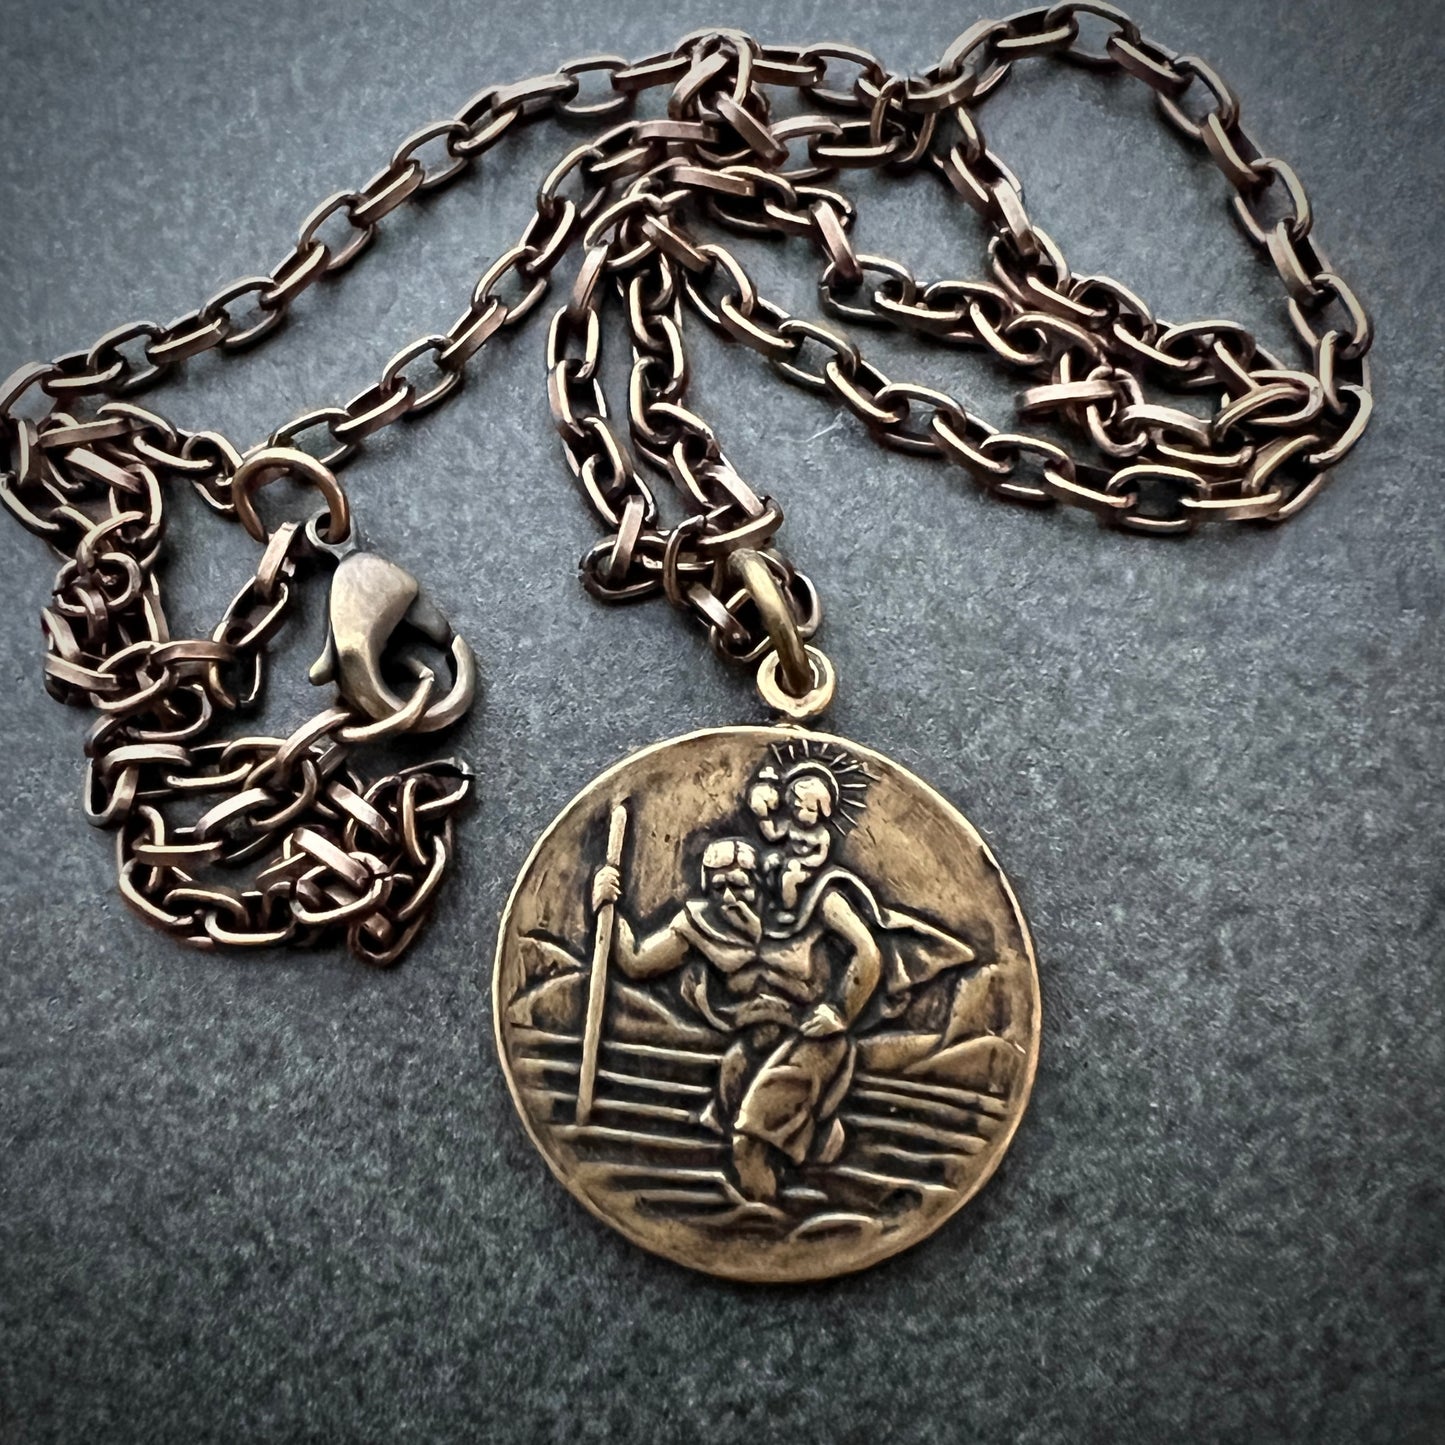 Men's Necklace St. Christopher, Patron of Travelers, Protect Us Talisman, Unisex Jewelry, Vintage Catholic Brass Medal, BR-011